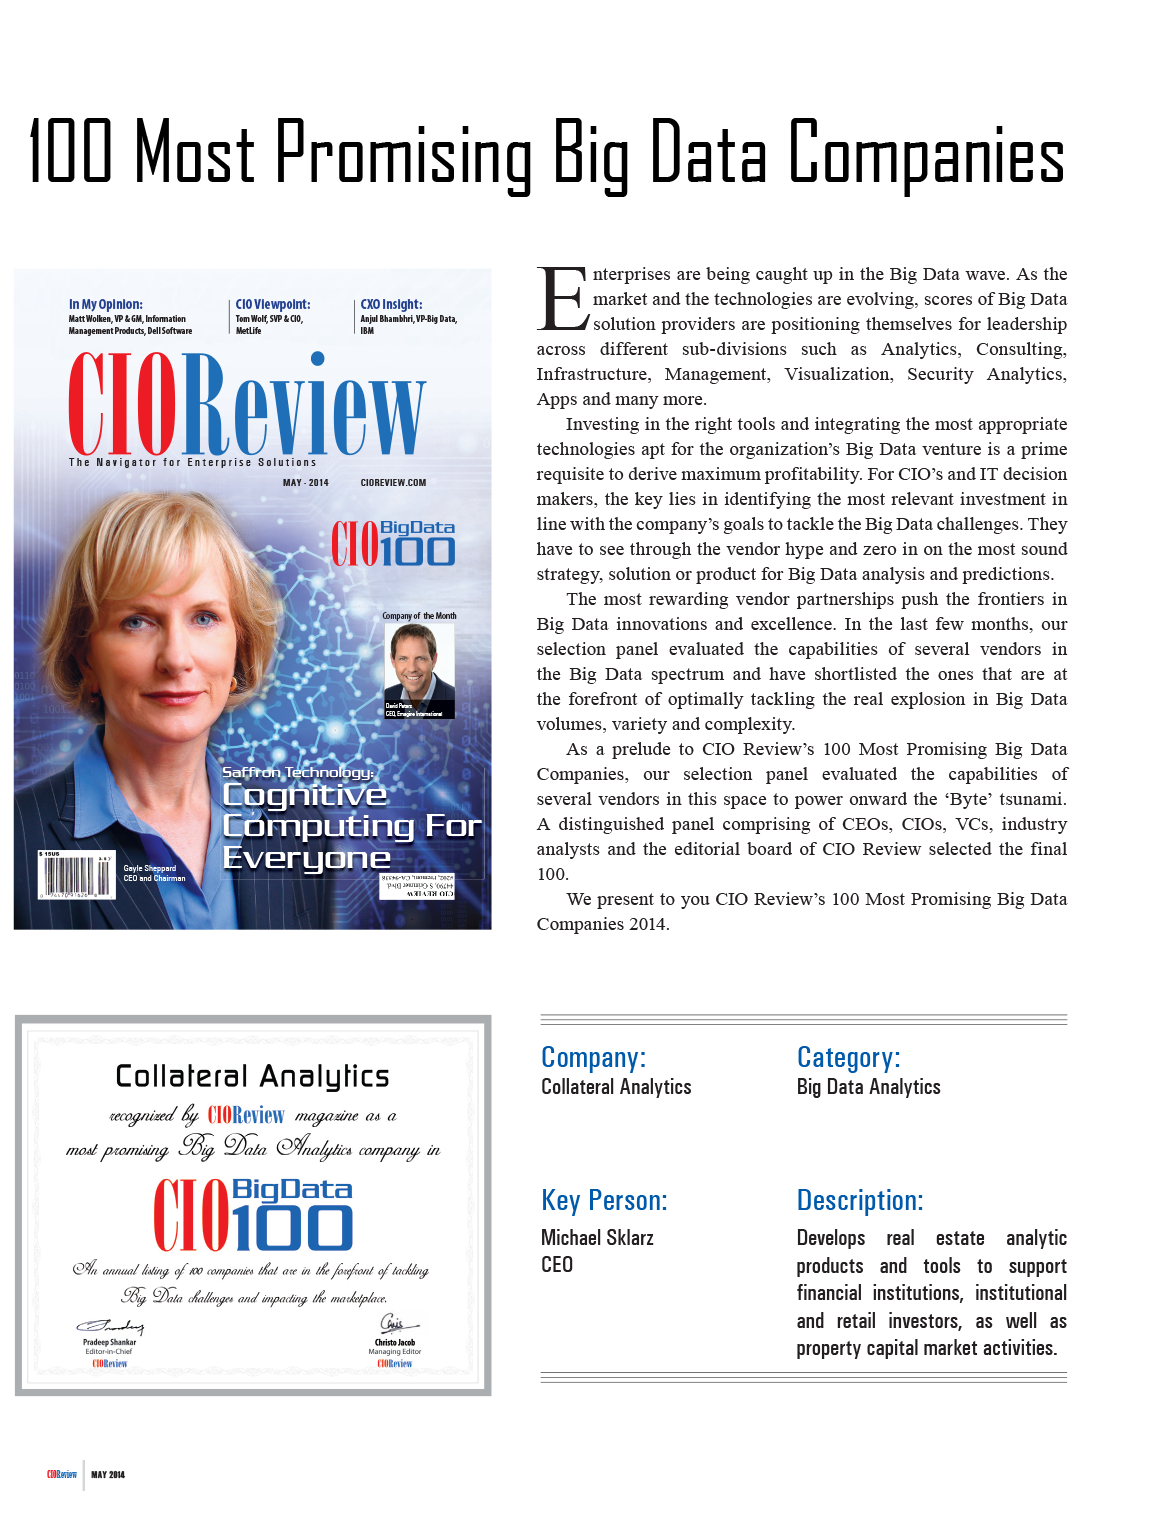 CIO REVIEW pg1 - Collateral Analytics